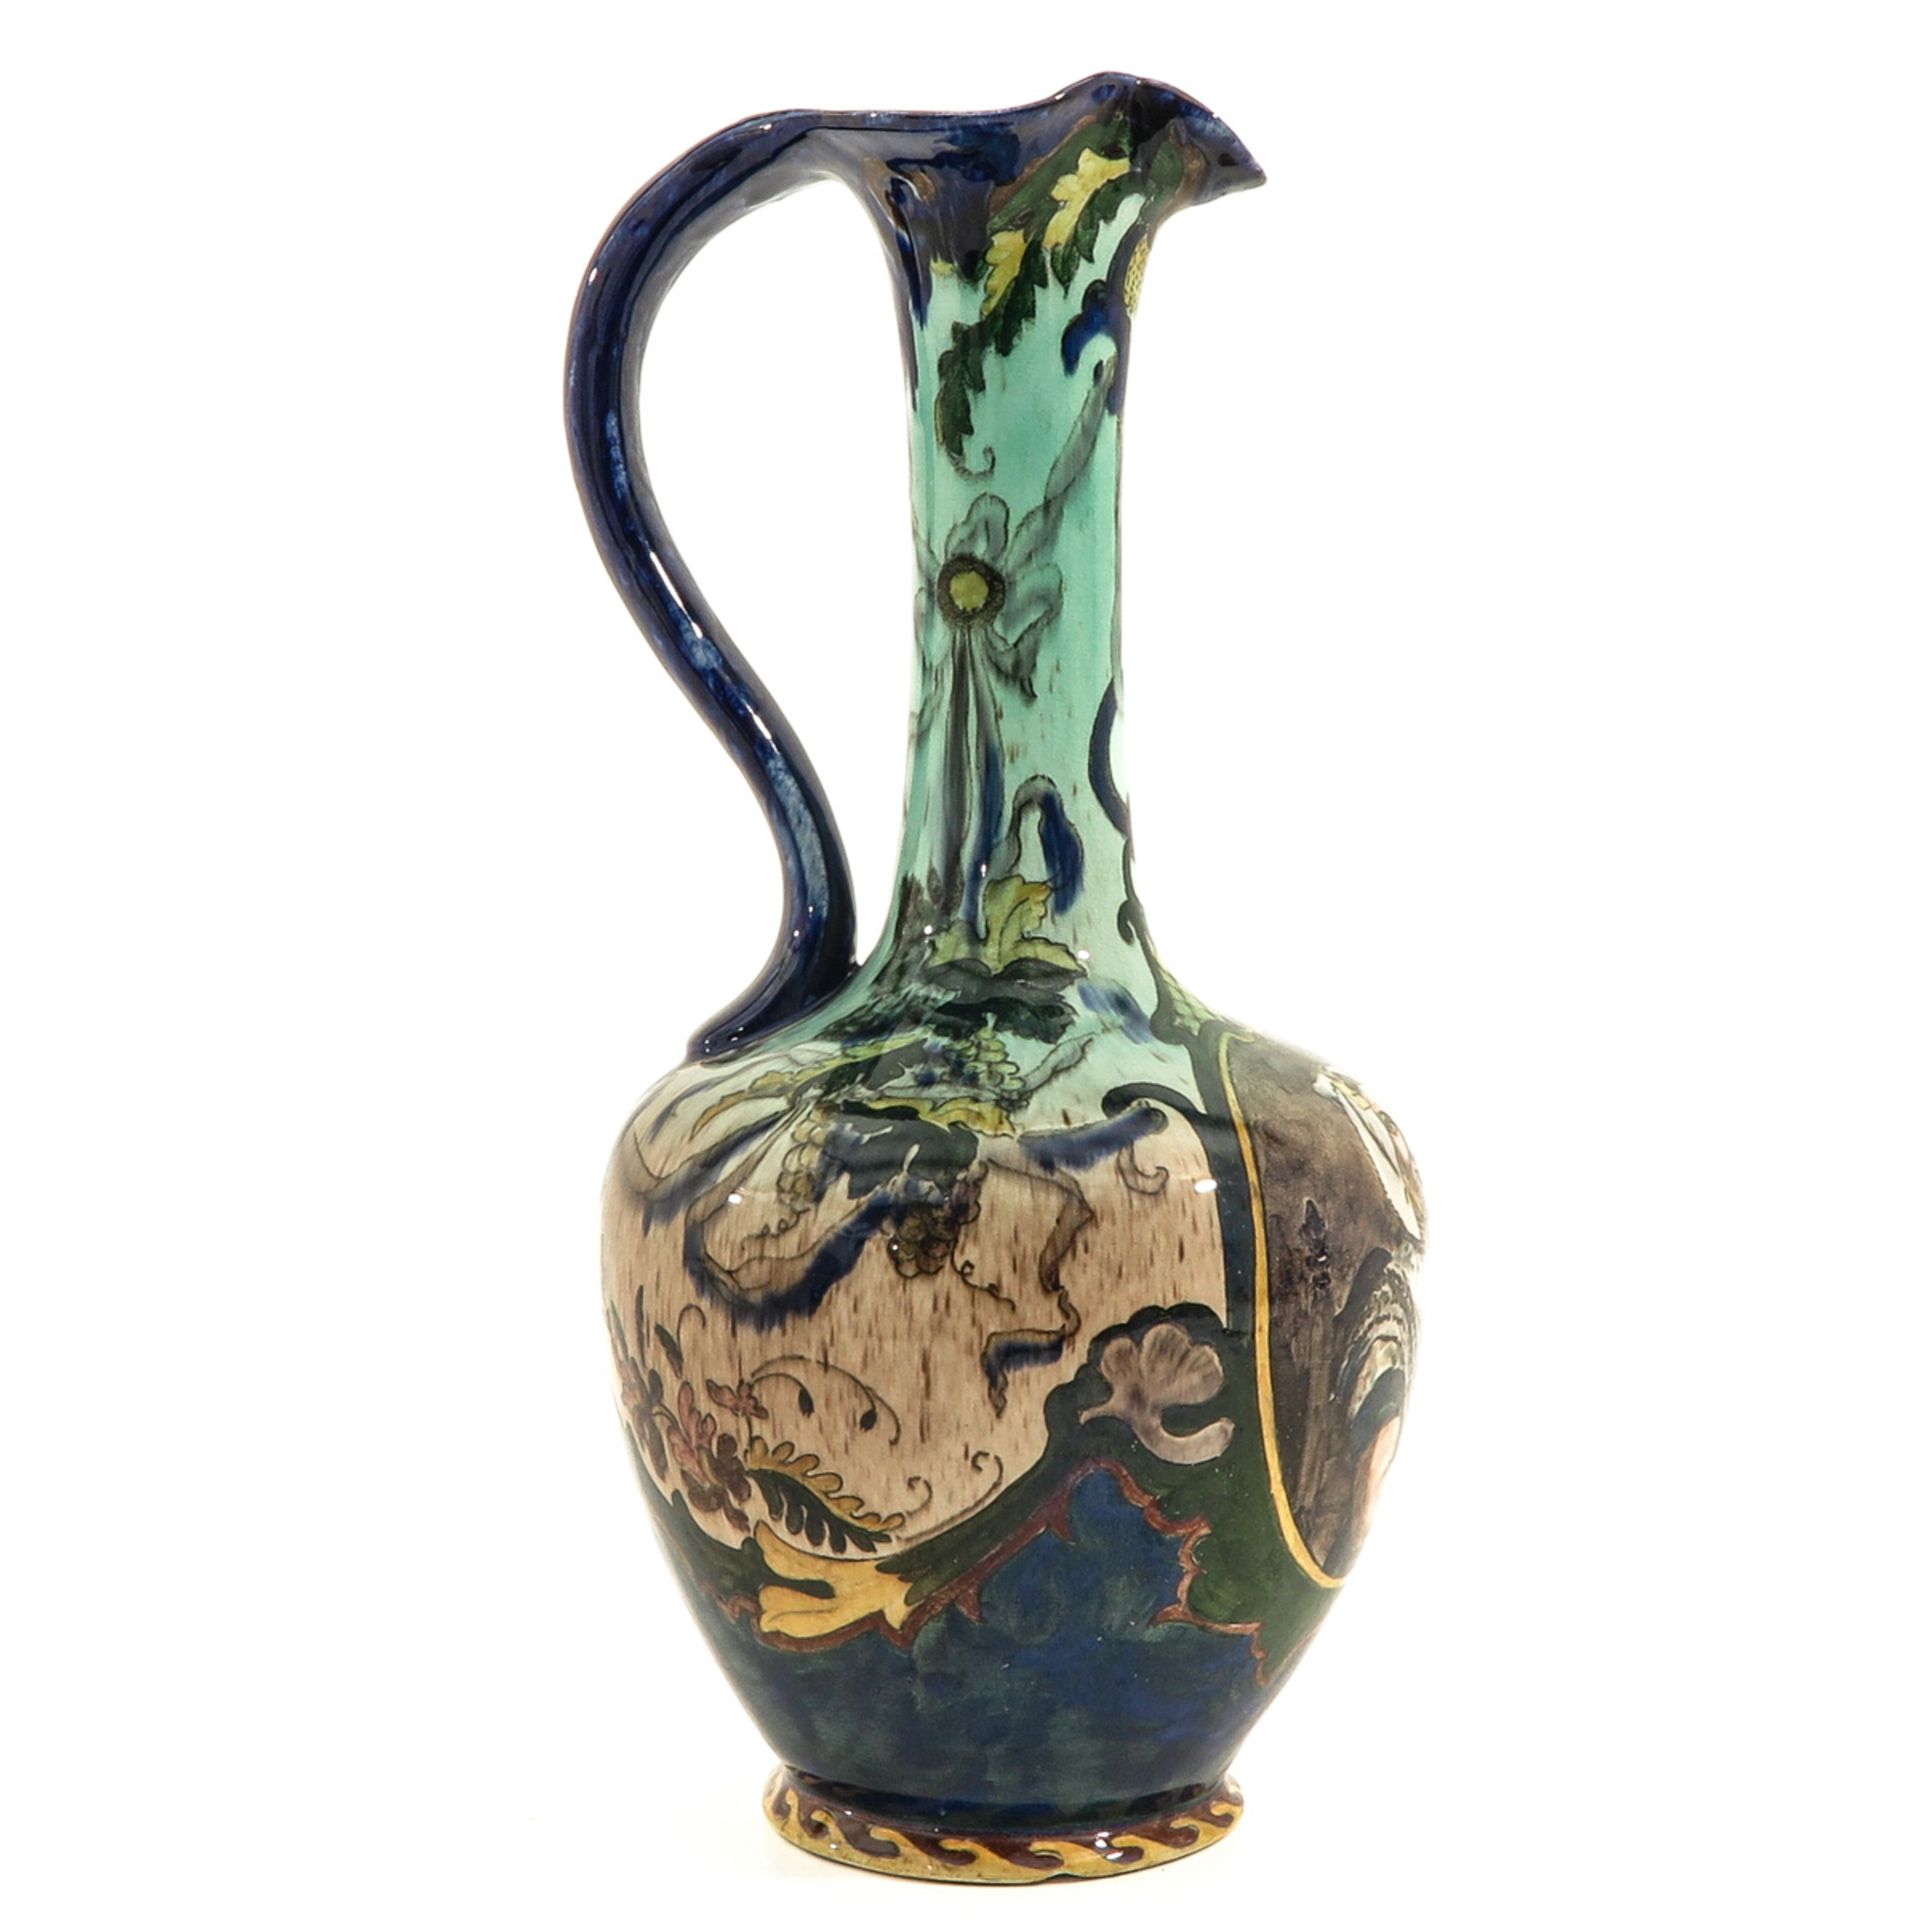 A Faience de Purmerend Pottery Jug - Image 4 of 10